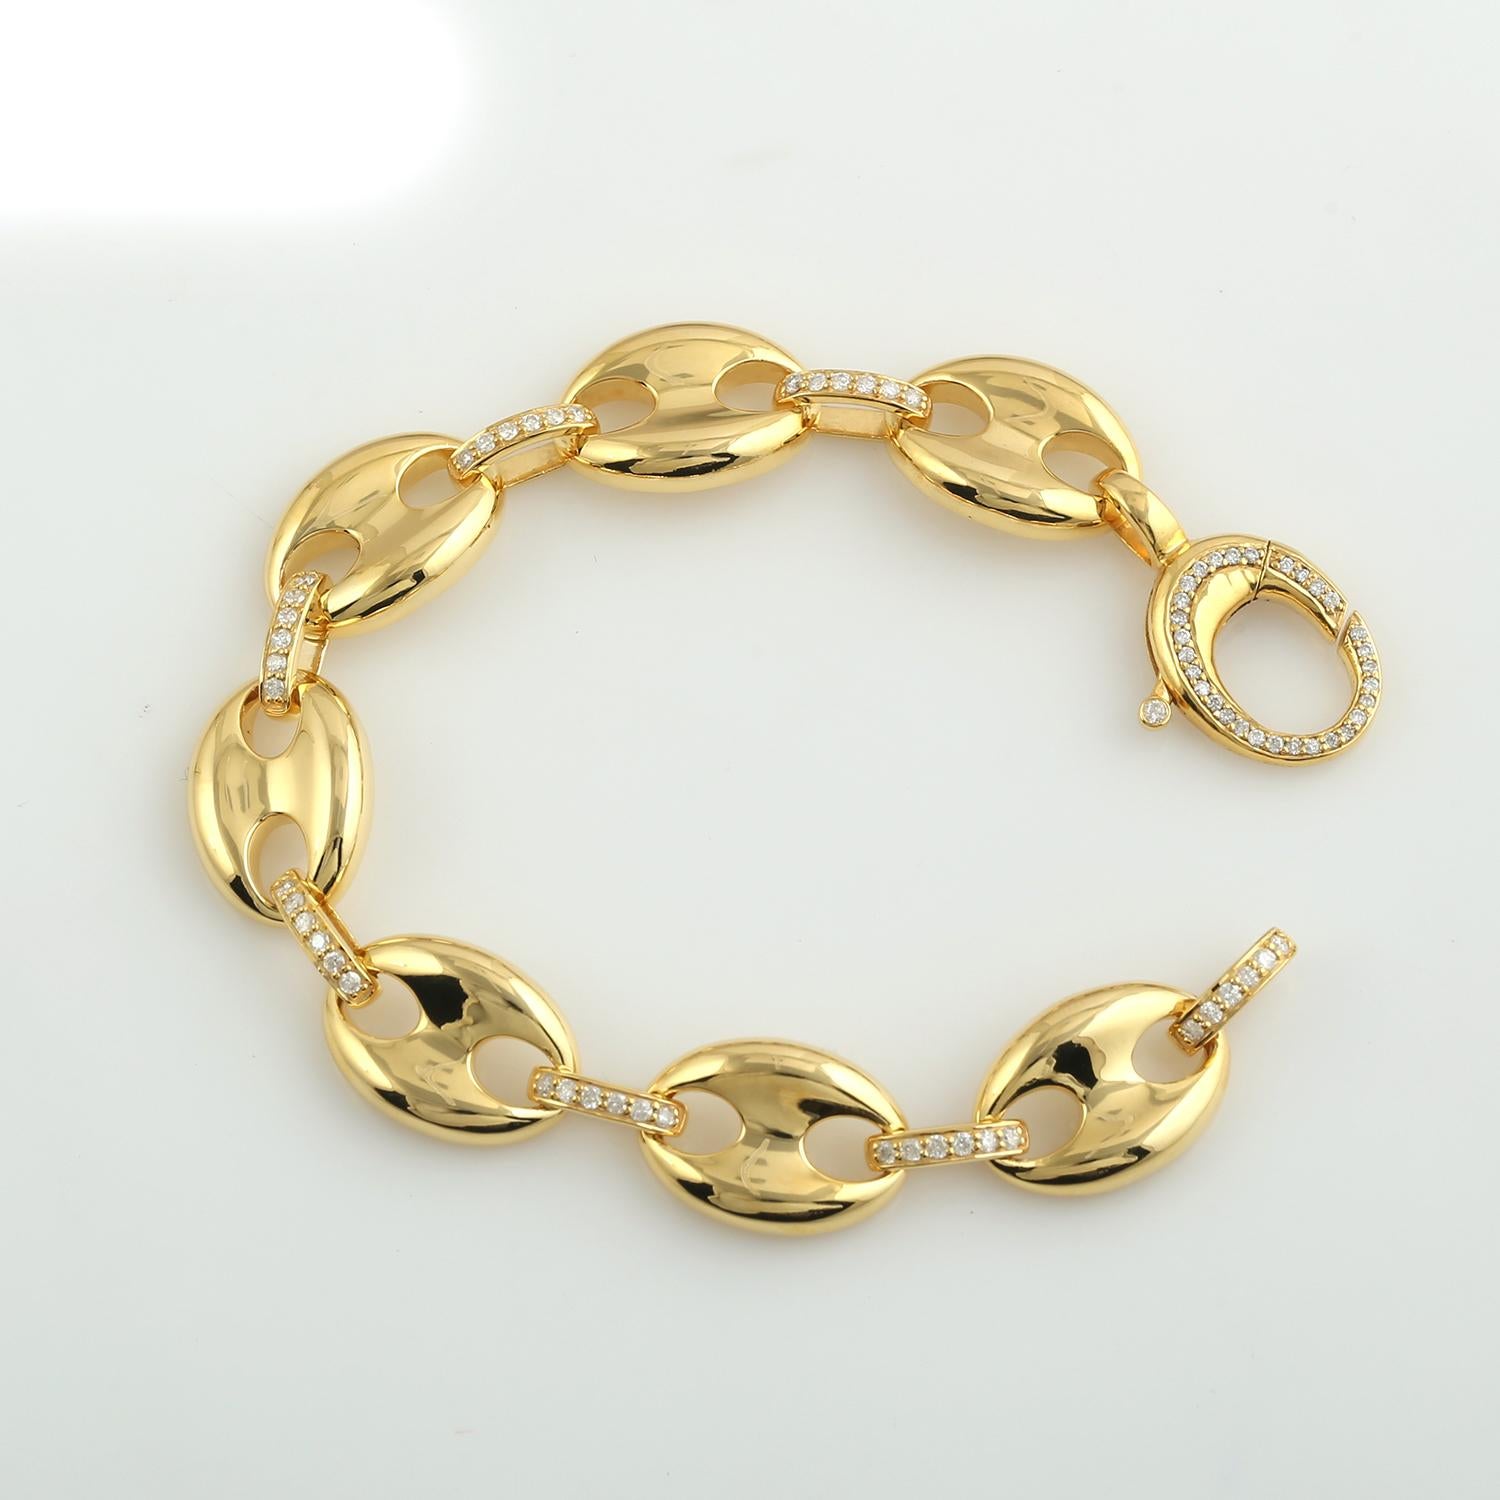 Mixed Cut Pave Diamond Link Bracelet Made In 14K Yellow Gold For Sale